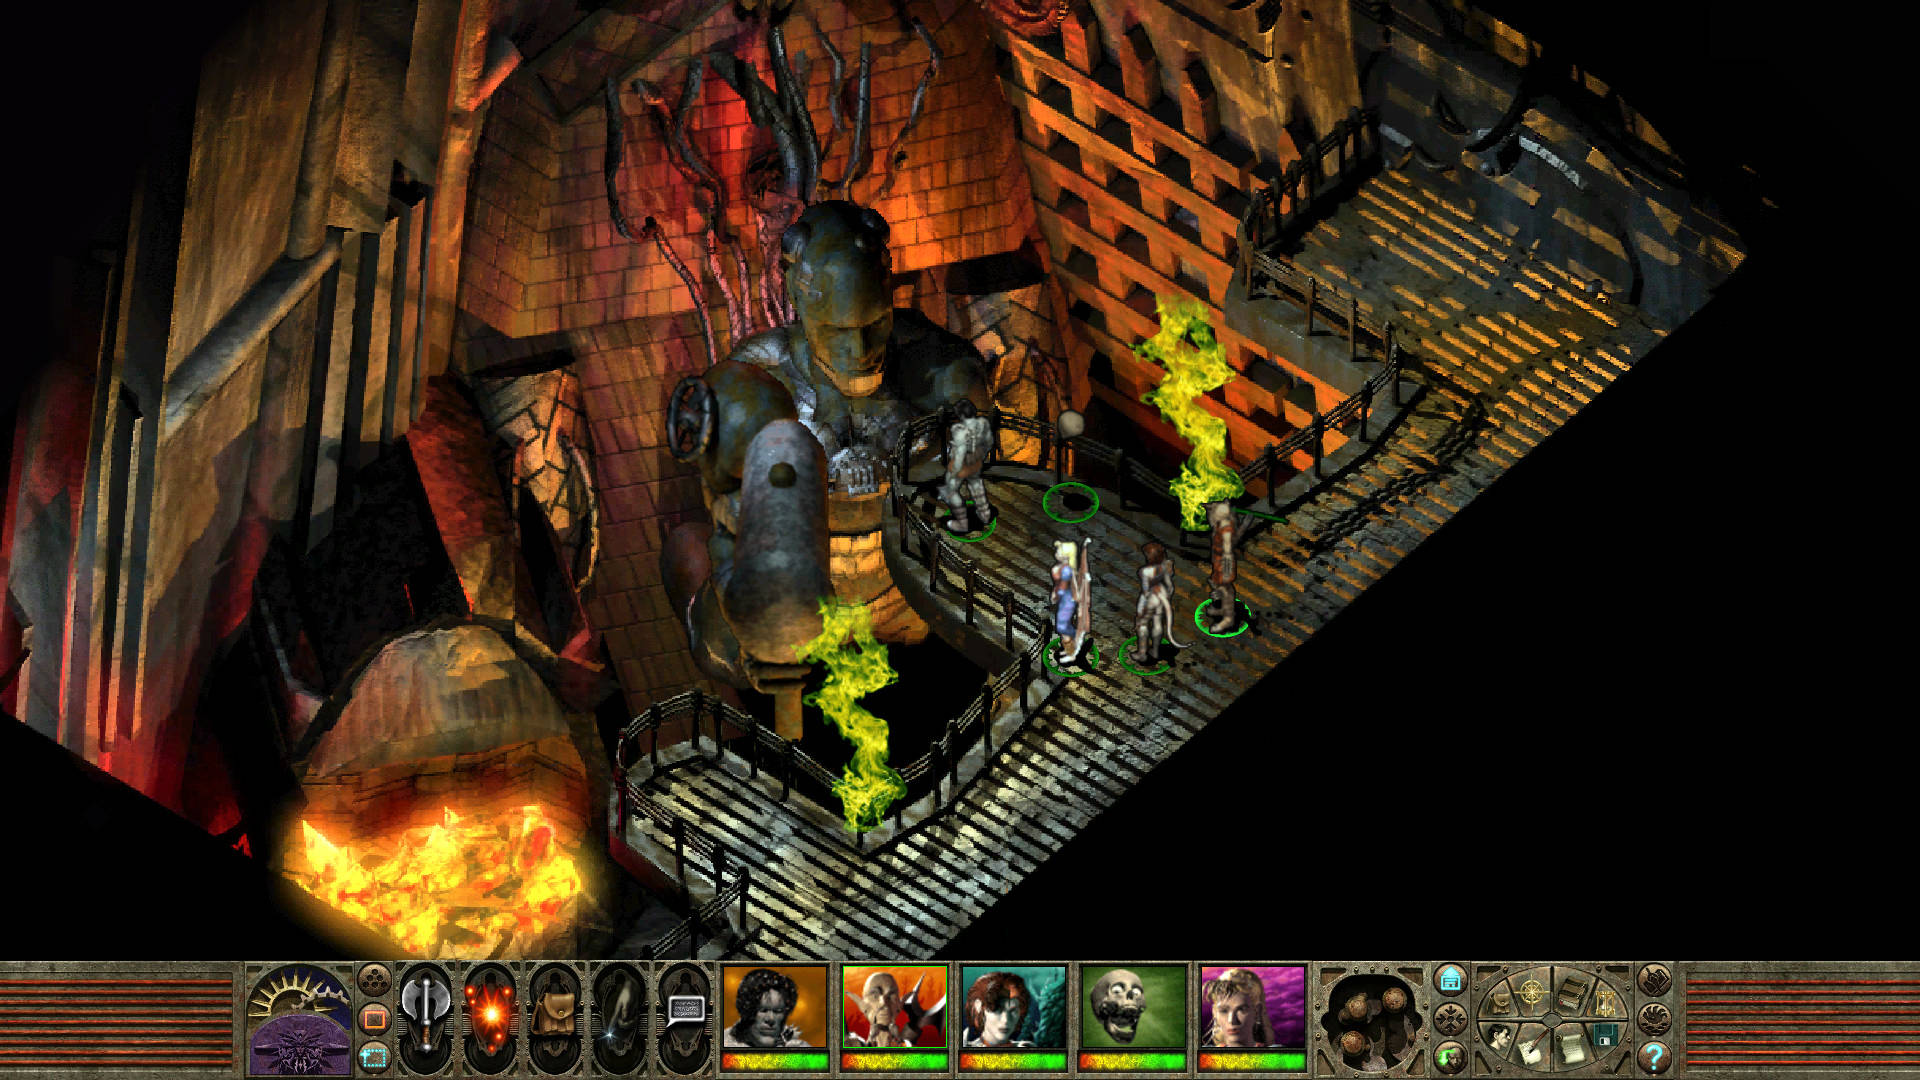 A scene from Planescape Torment, one of the best DnD games, where the party talks to a giant blacksmith.